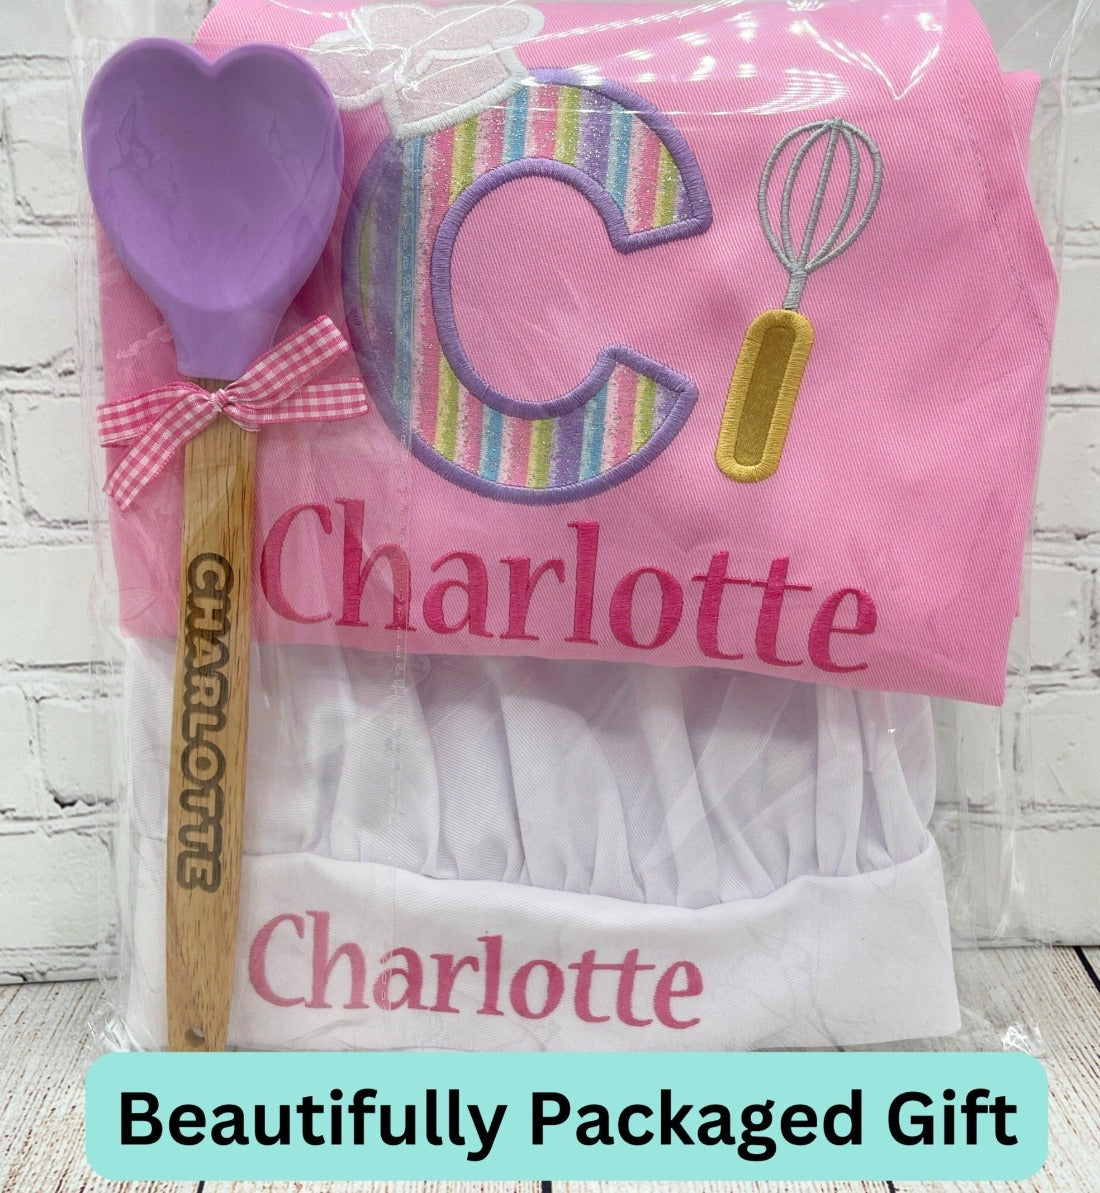 Girls Personalized Embroidered 3 piece set- apron, chef hat and engraved spatula. Matching name on all 3.